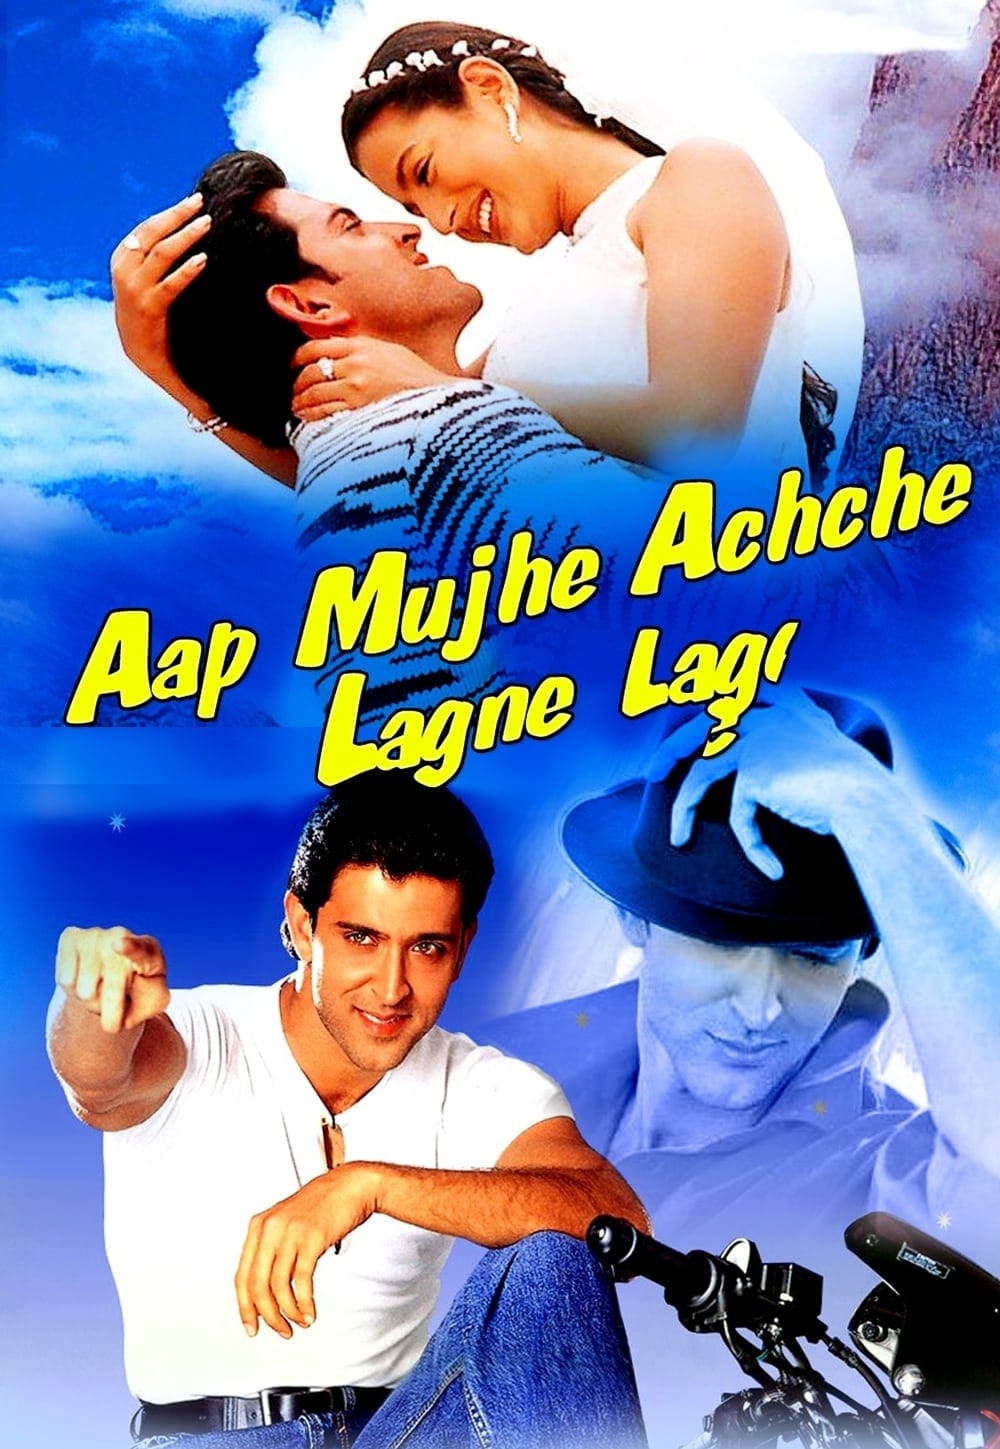 Poster for the movie "Aap Mujhe Achche Lagne Lage"